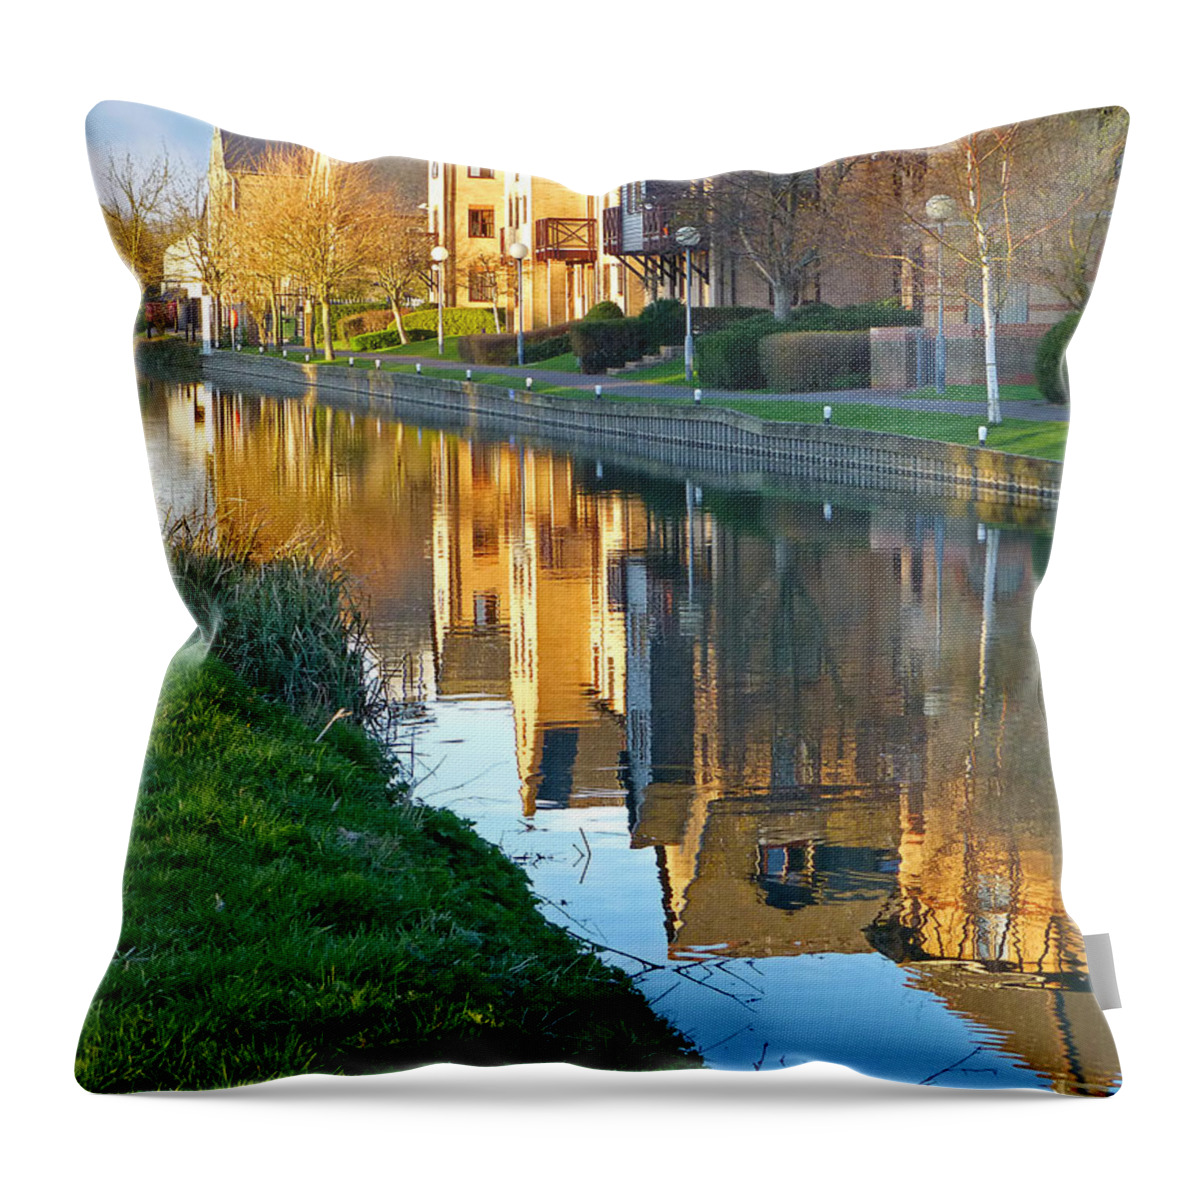 River Throw Pillow featuring the photograph The Maltings Reflections by Gill Billington